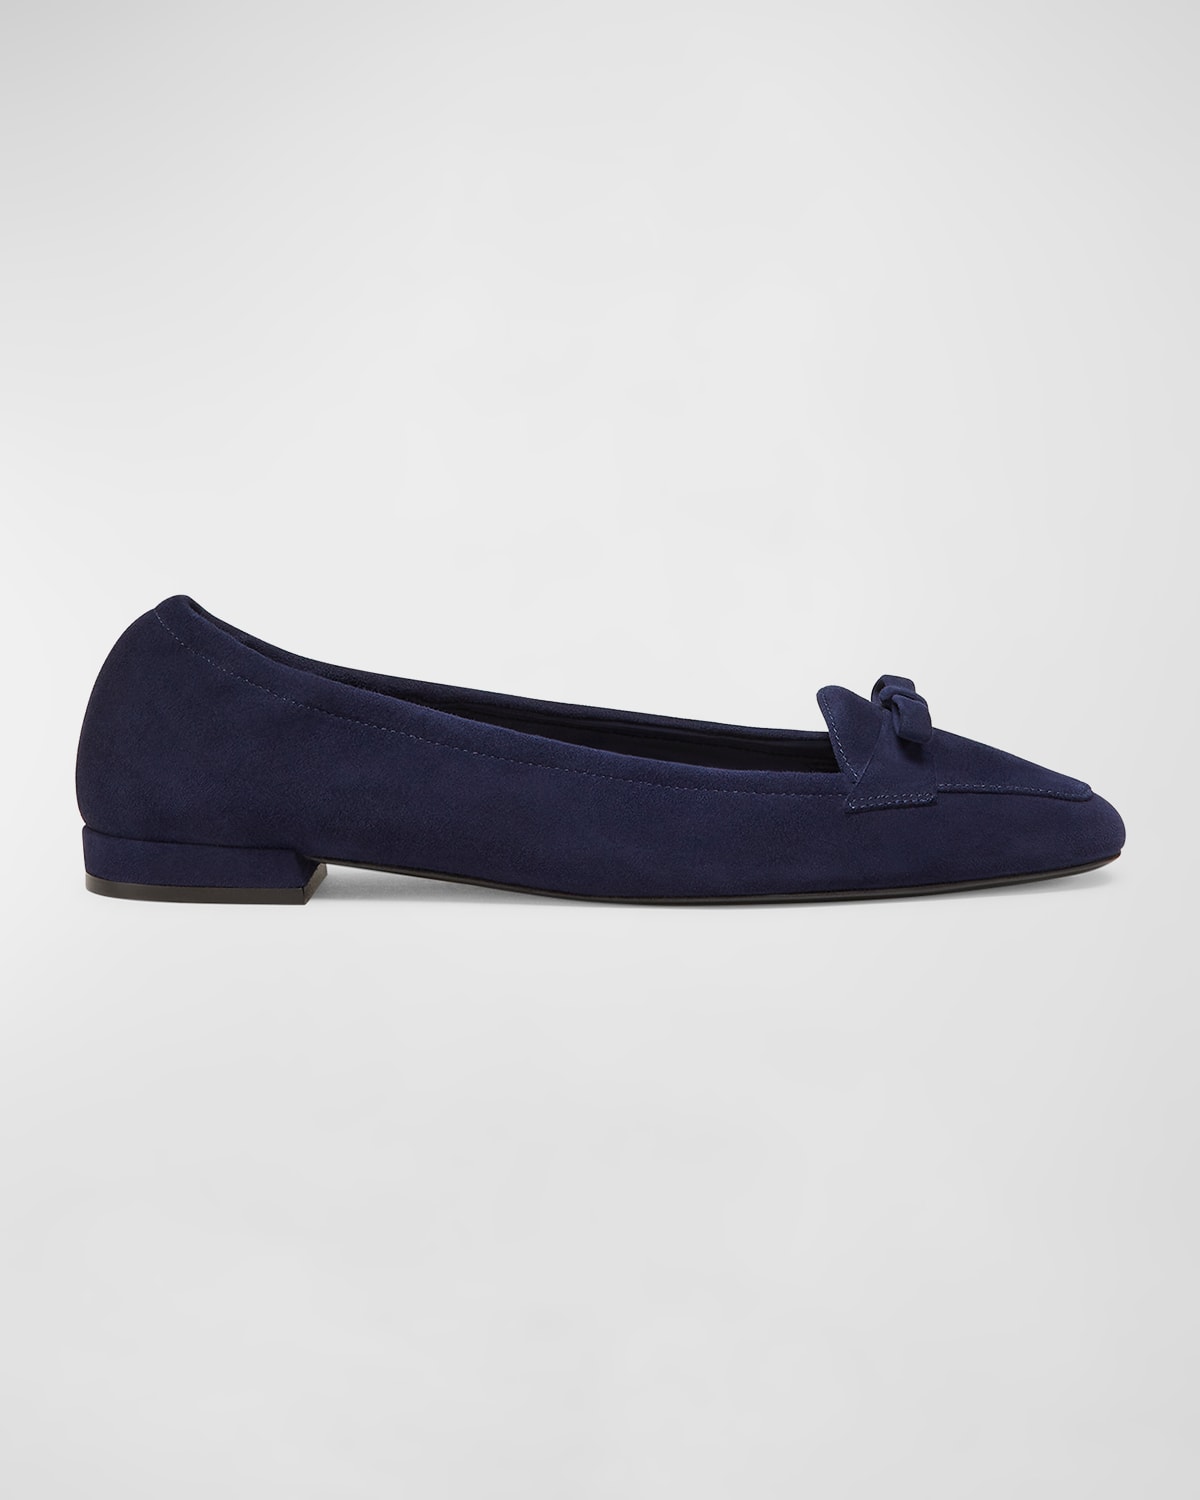 Stuart Weitzman Tully Suede Bow Ballerina Loafers In Blue